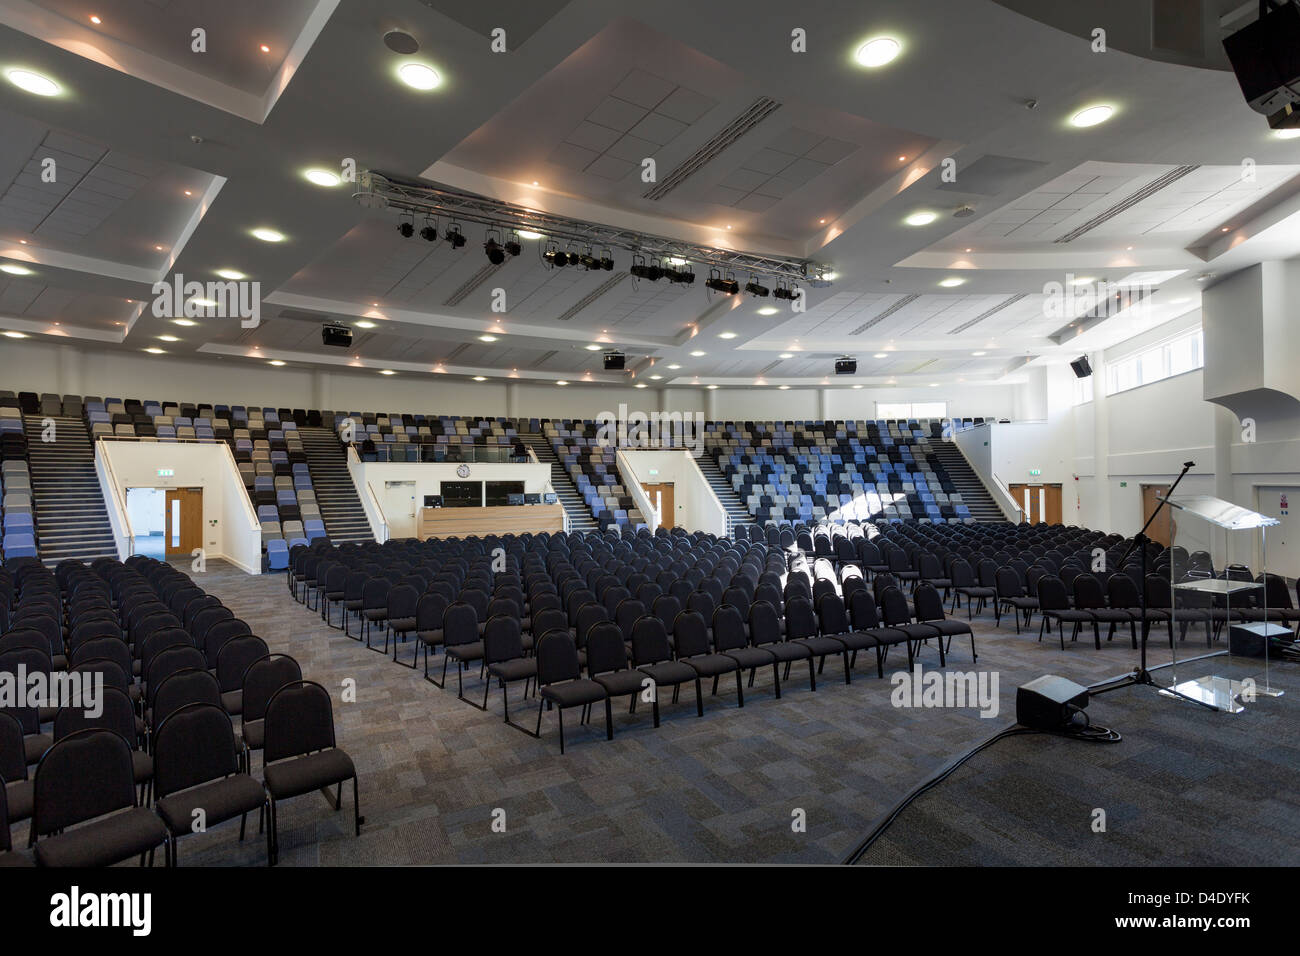 Kings Community Church modern church to hode 1200 people with tiered seating Stock Photo